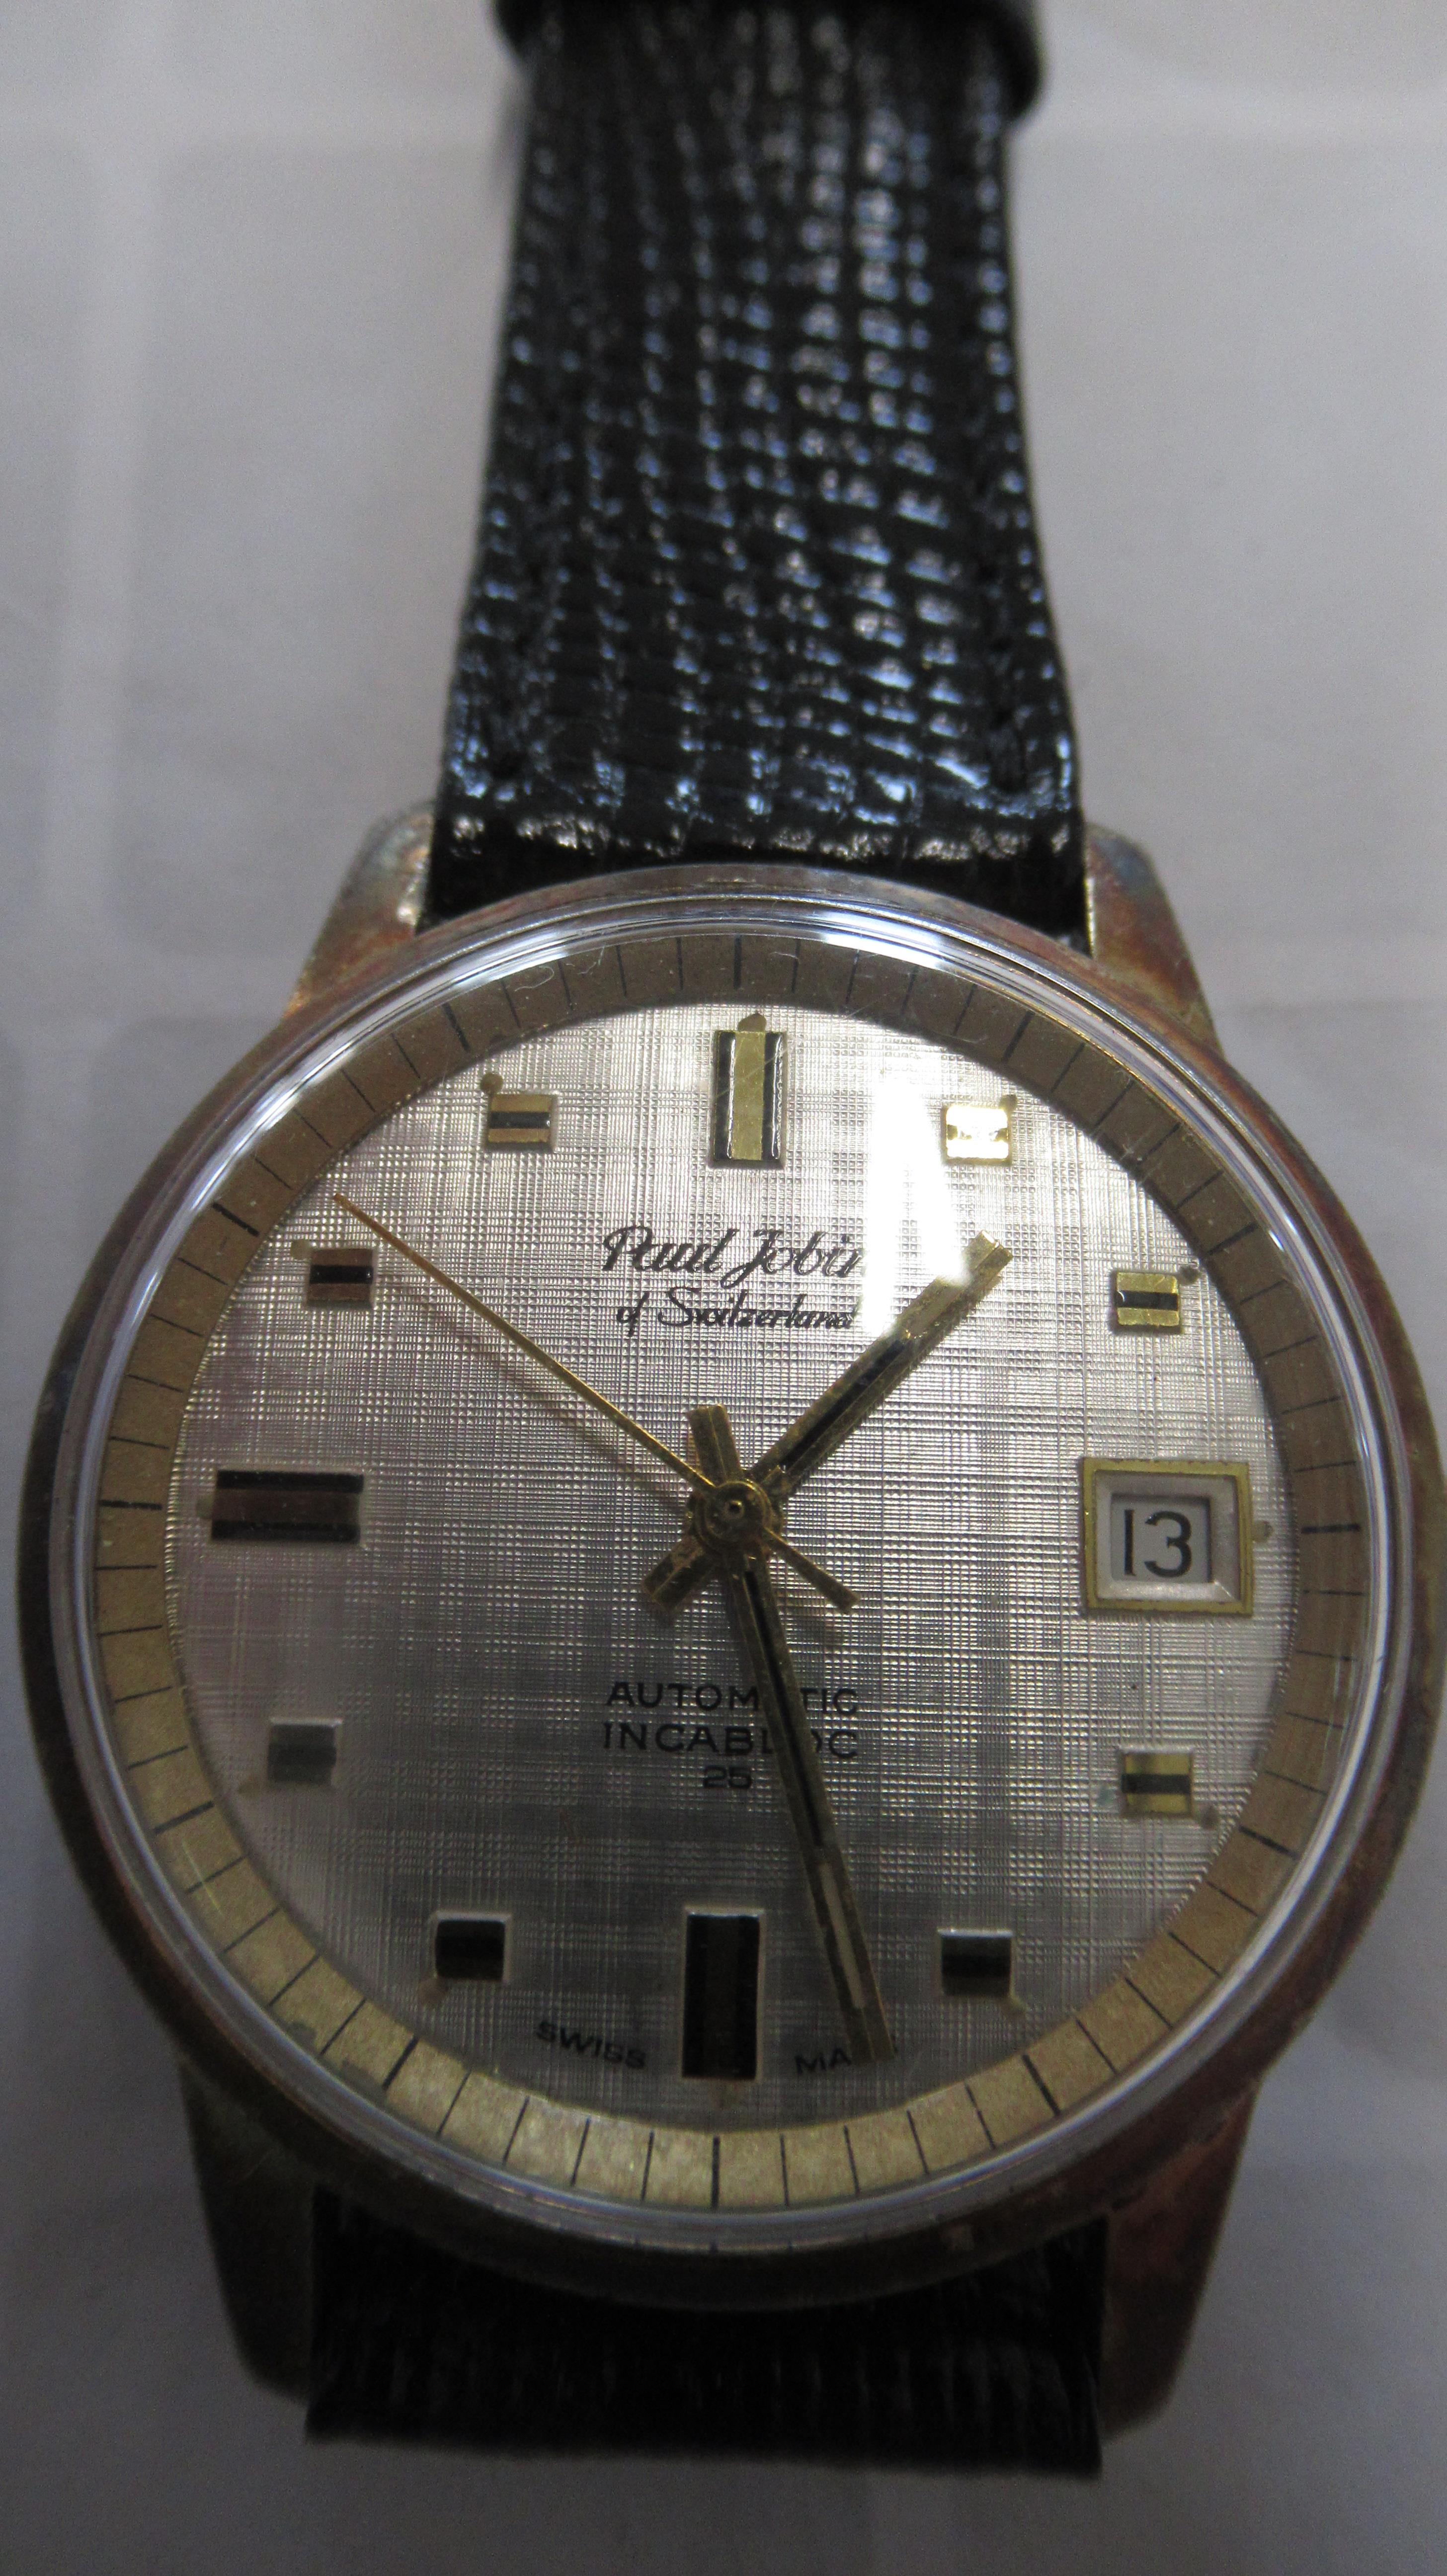 A gents Paul Jobin auto watch with date and seconds on black leather strap - working in the saleroom